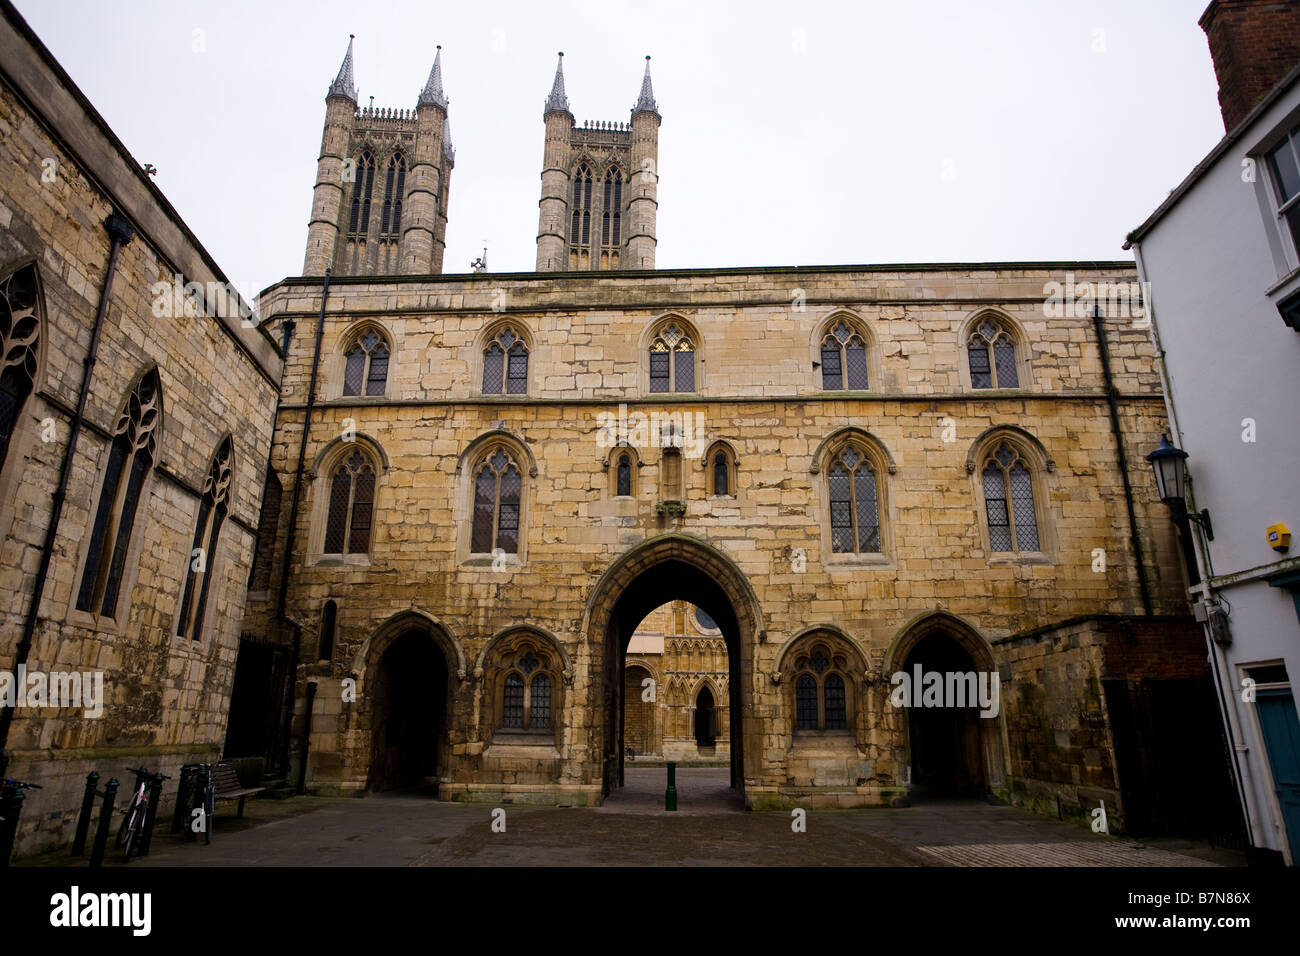 The towers of Lincoln Cathedral behind Exchequer Gate, England. Stock Photo